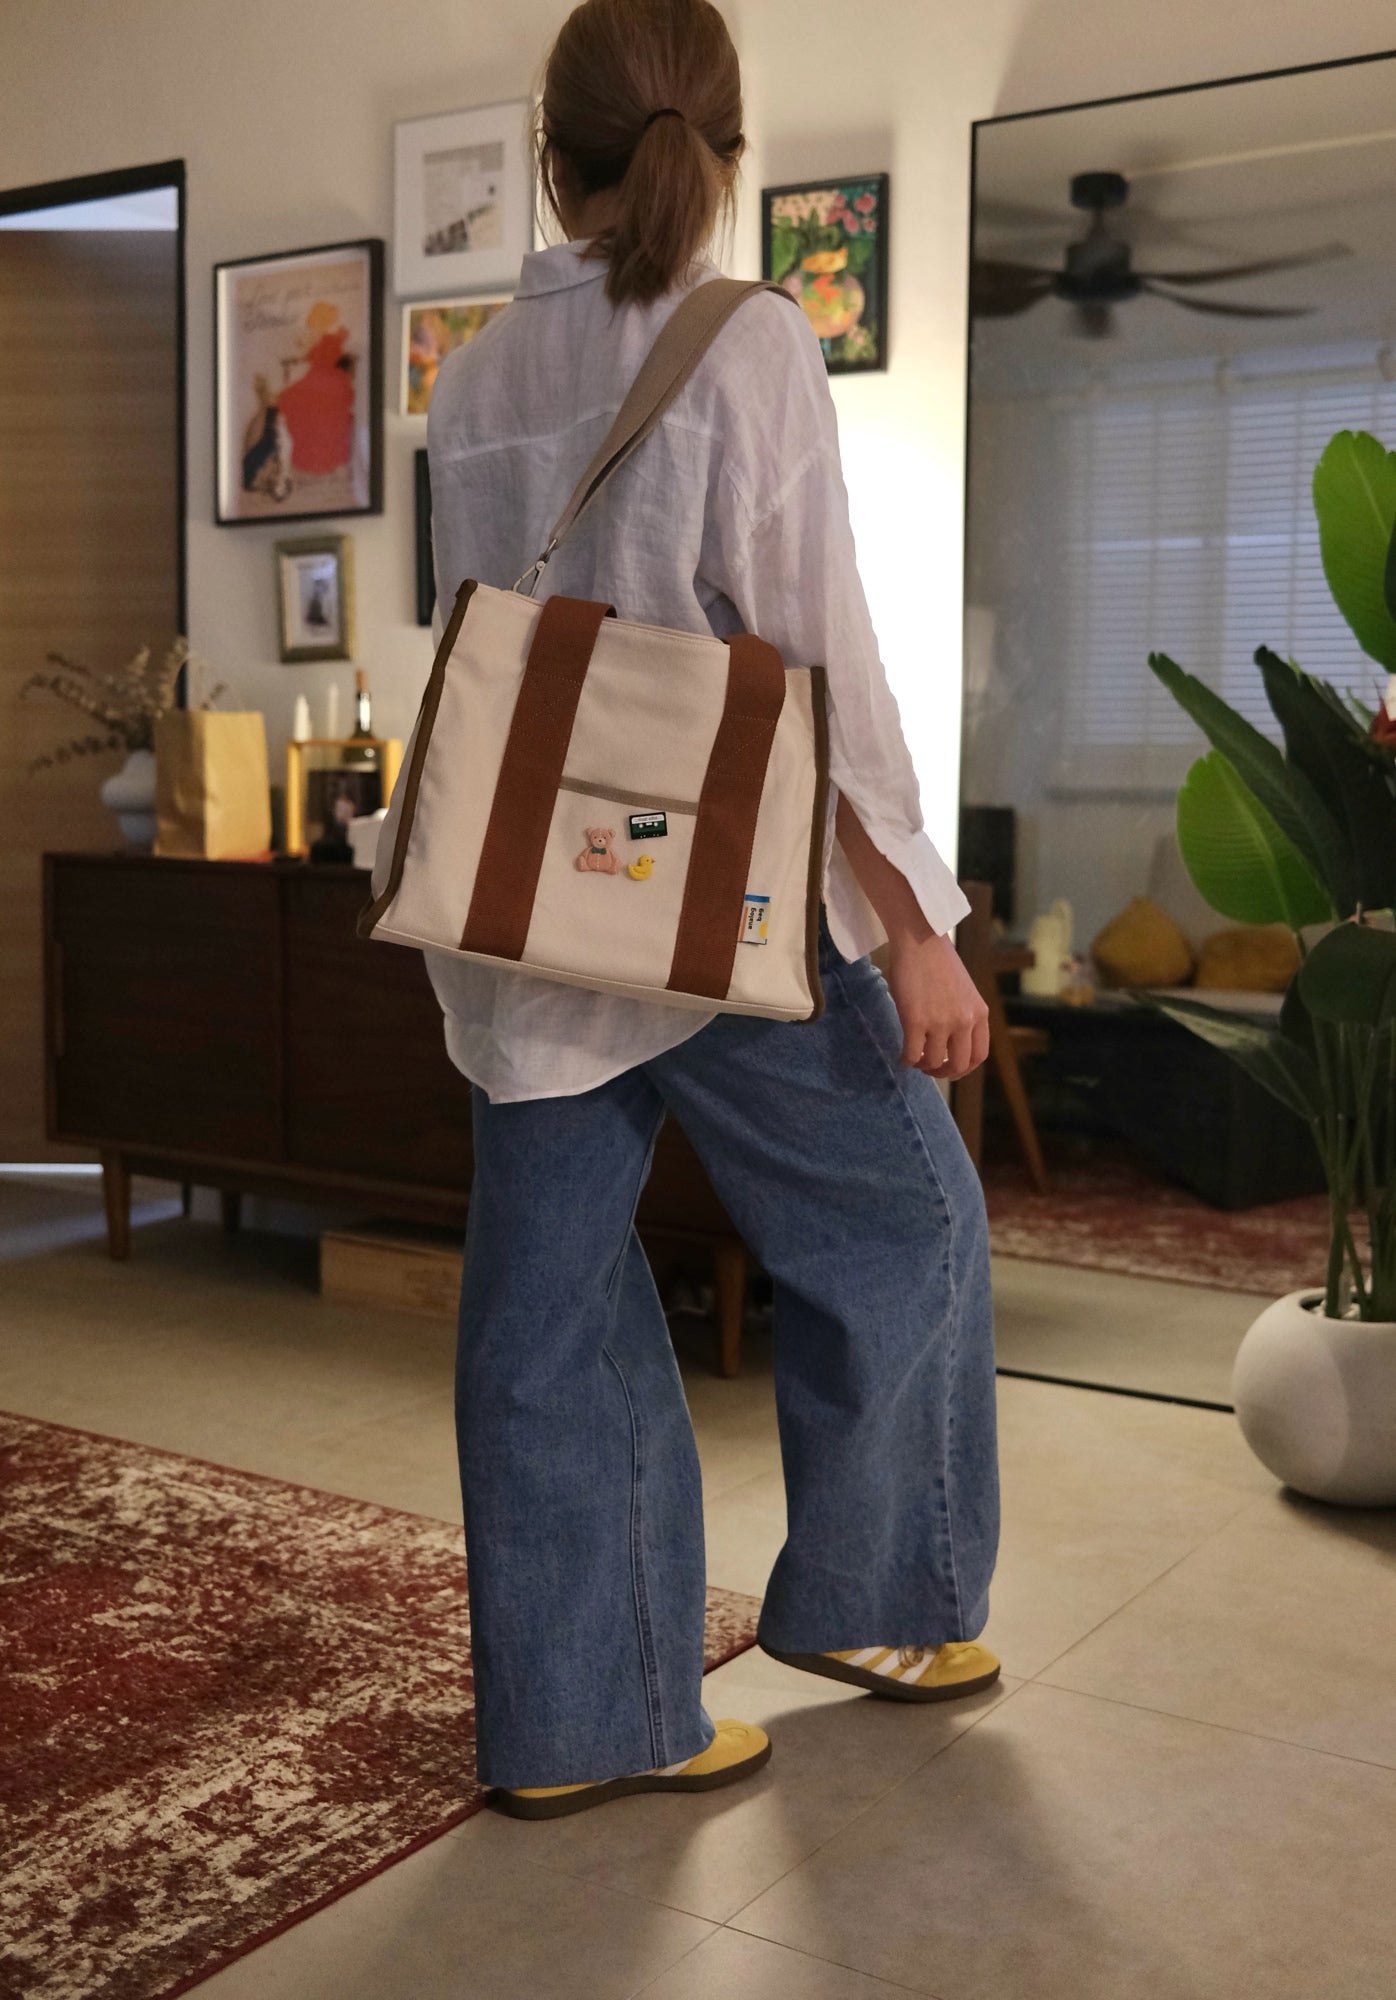 Analog No.7 Laptop Tote (Limited Edition)